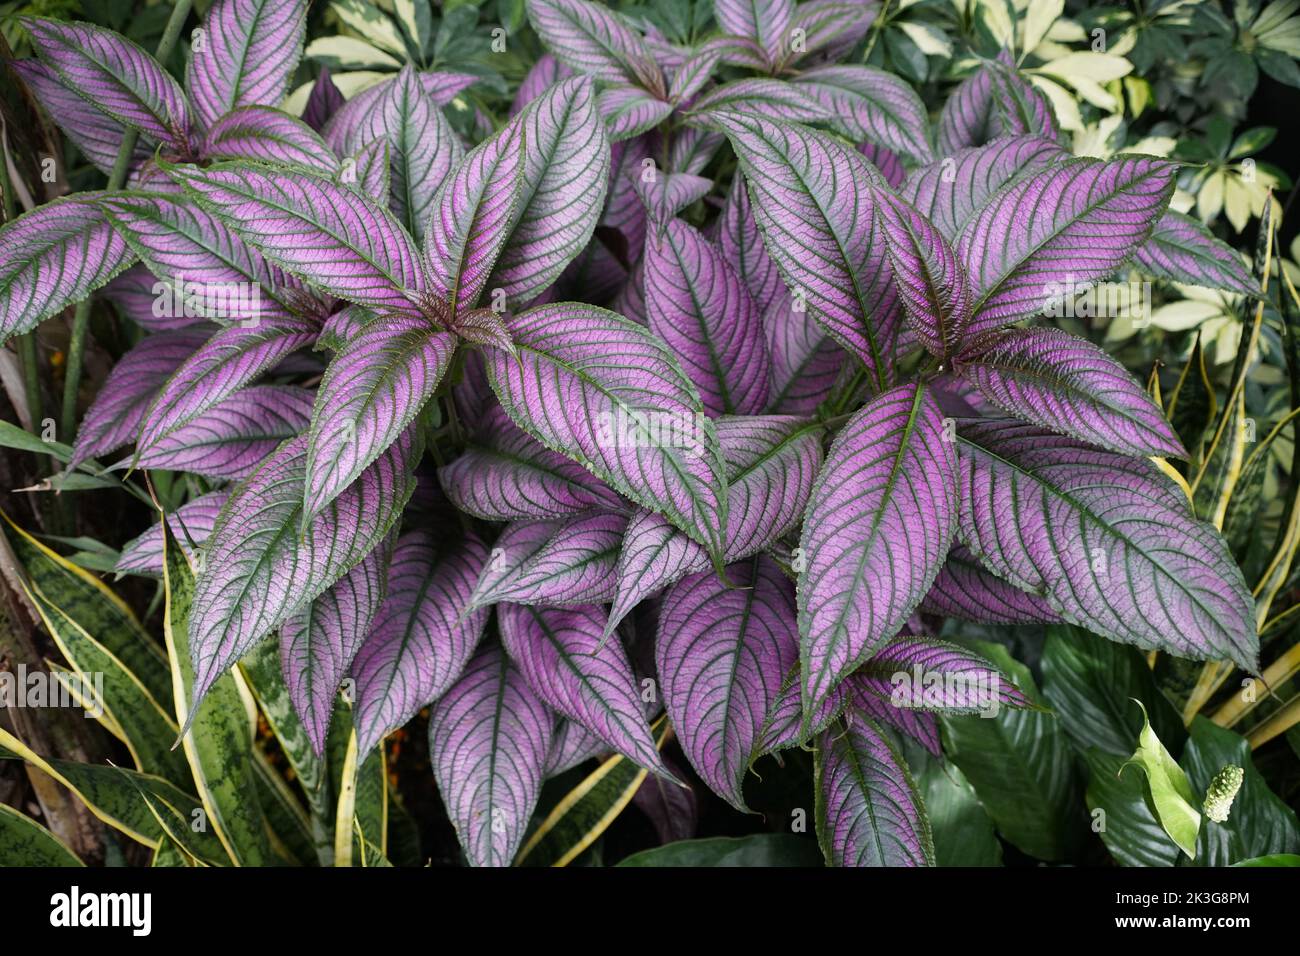 Persian Shield plant with stunning color of purple leaves Stock Photo